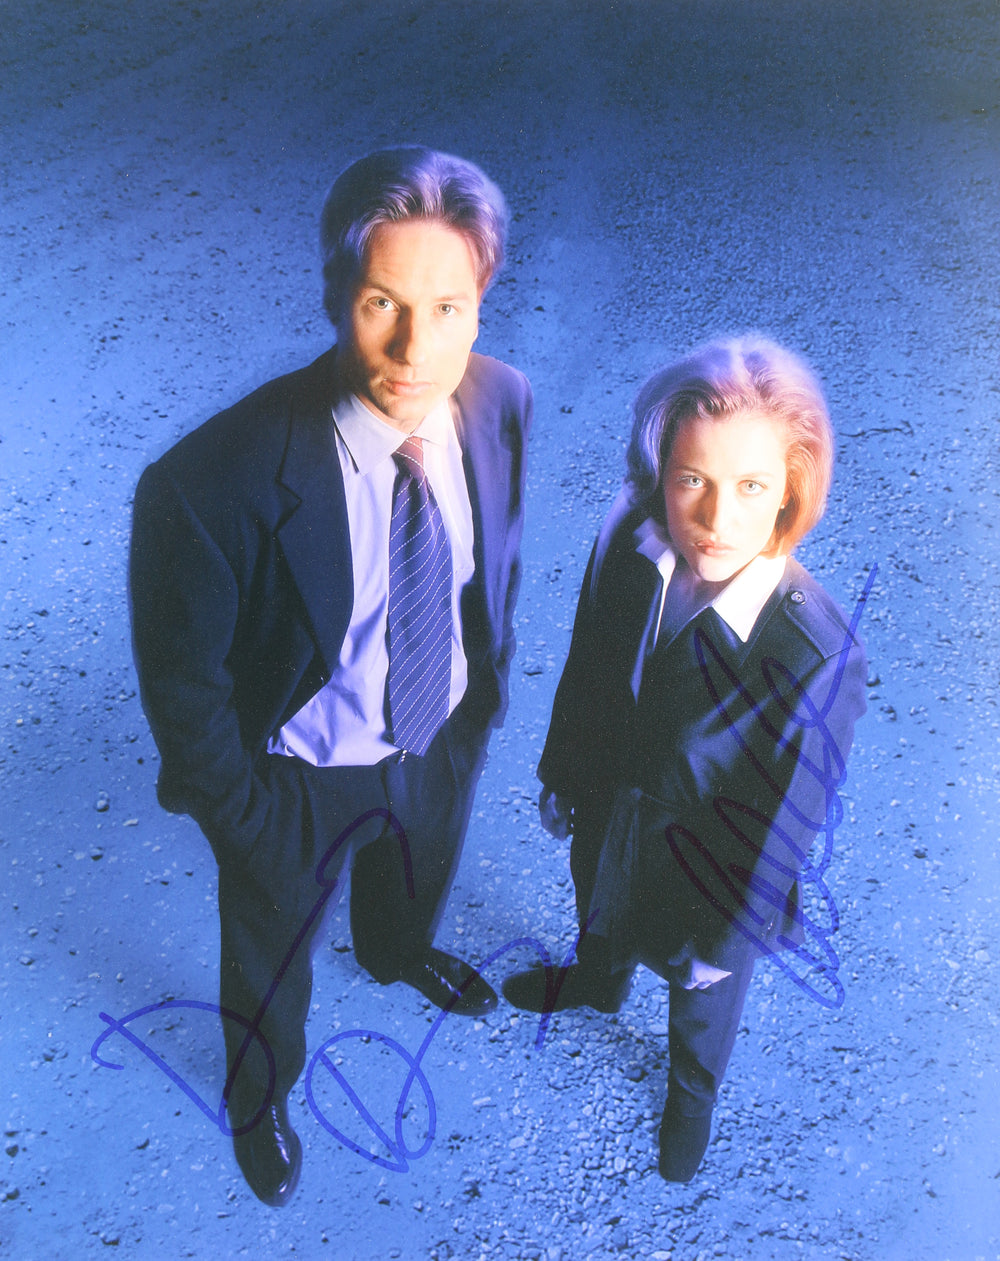 David Duchovny Fox Mulder and Gillian Anderson as Dana Scully in The X-Files Signed 8x10 Photo